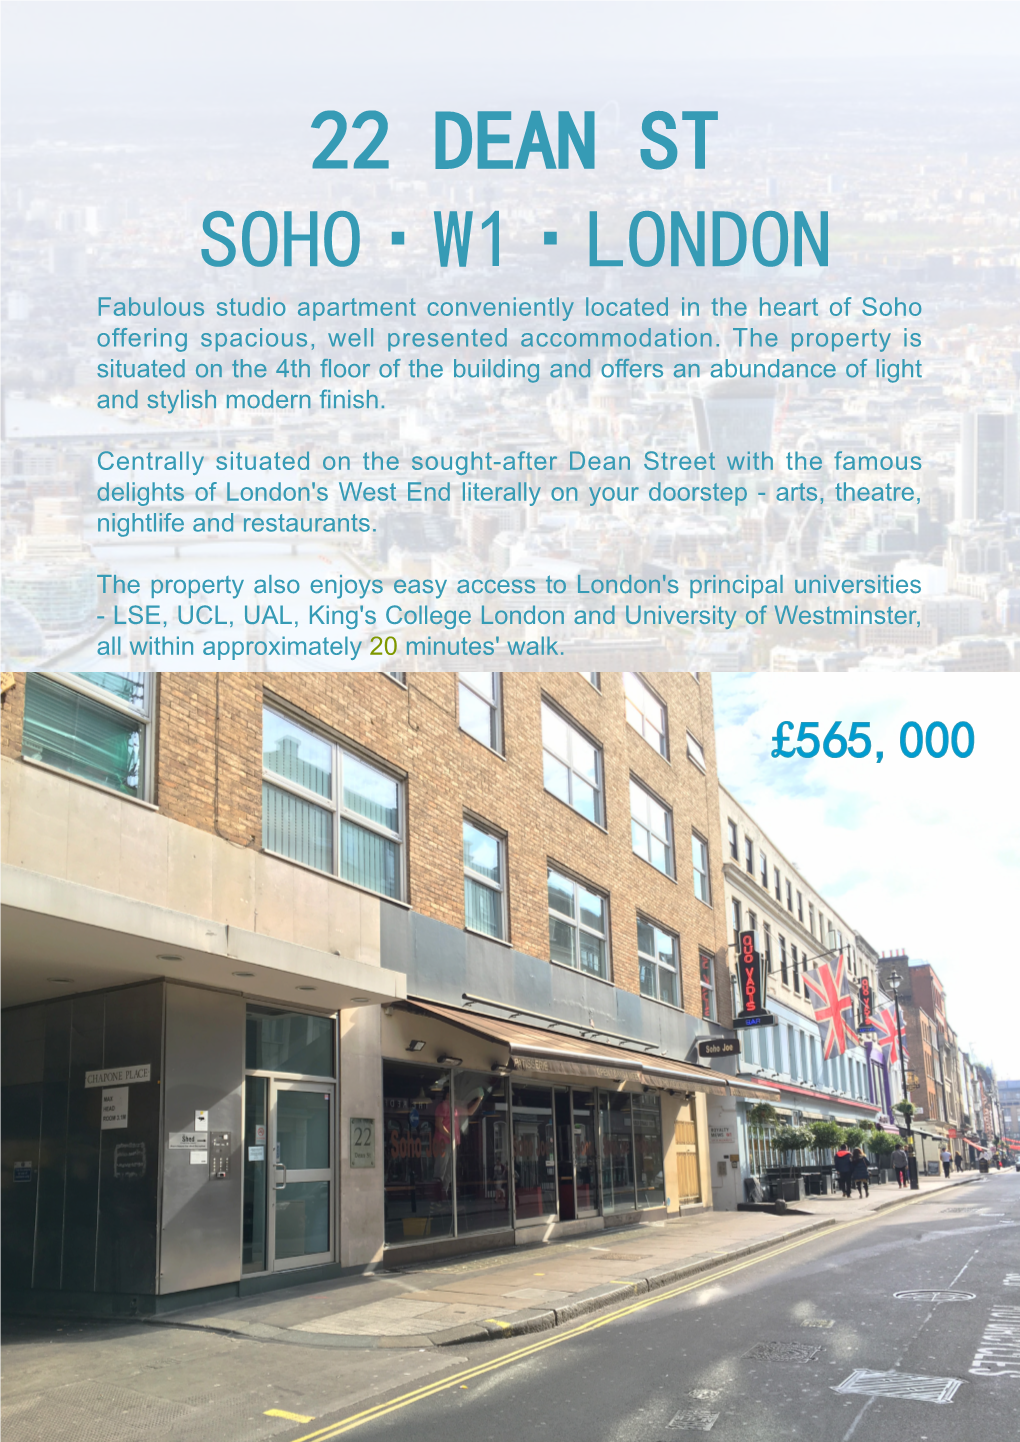 22 DEAN ST SOHO·W1·LONDON Fabulous Studio Apartment Conveniently Located in the Heart of Soho Offering Spacious, Well Presented Accommodation